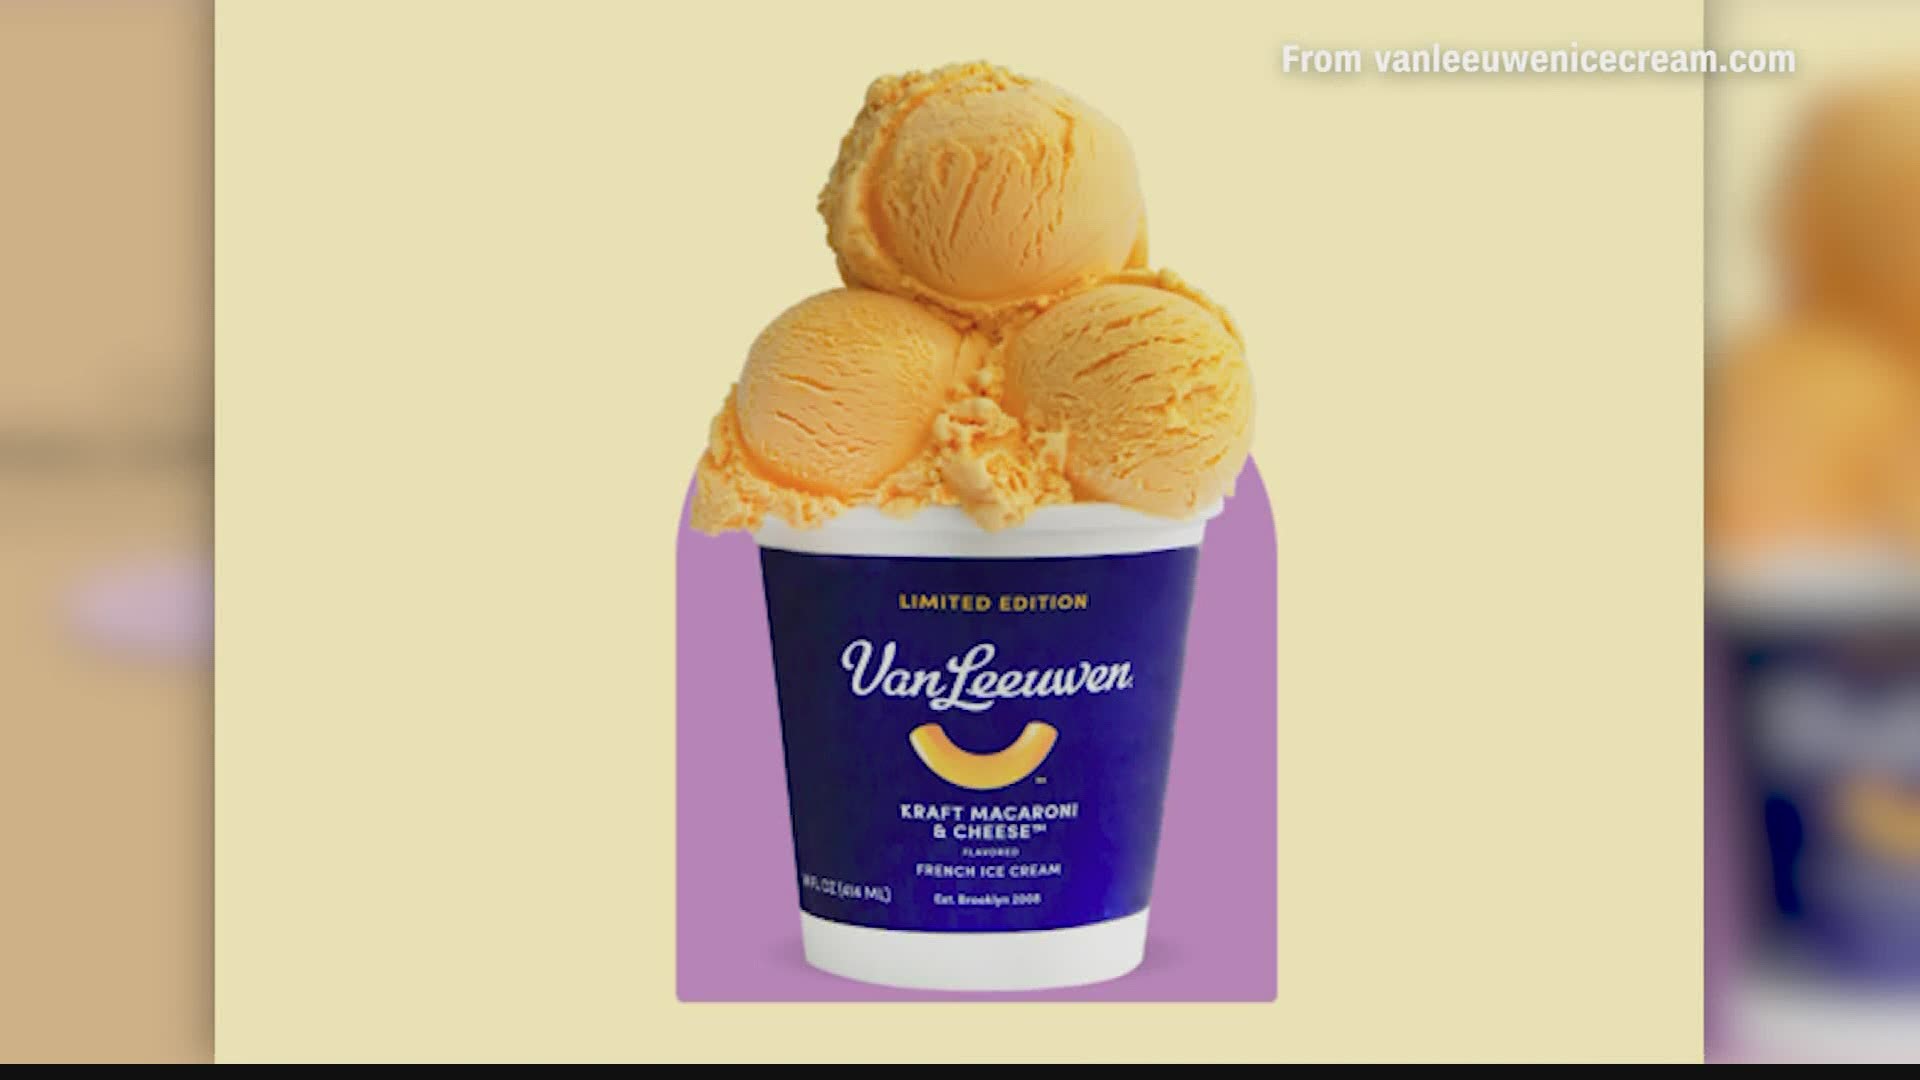 Kraft partnered with a Brooklyn ice cream maker to turn its popular dinner into a sweet treat.